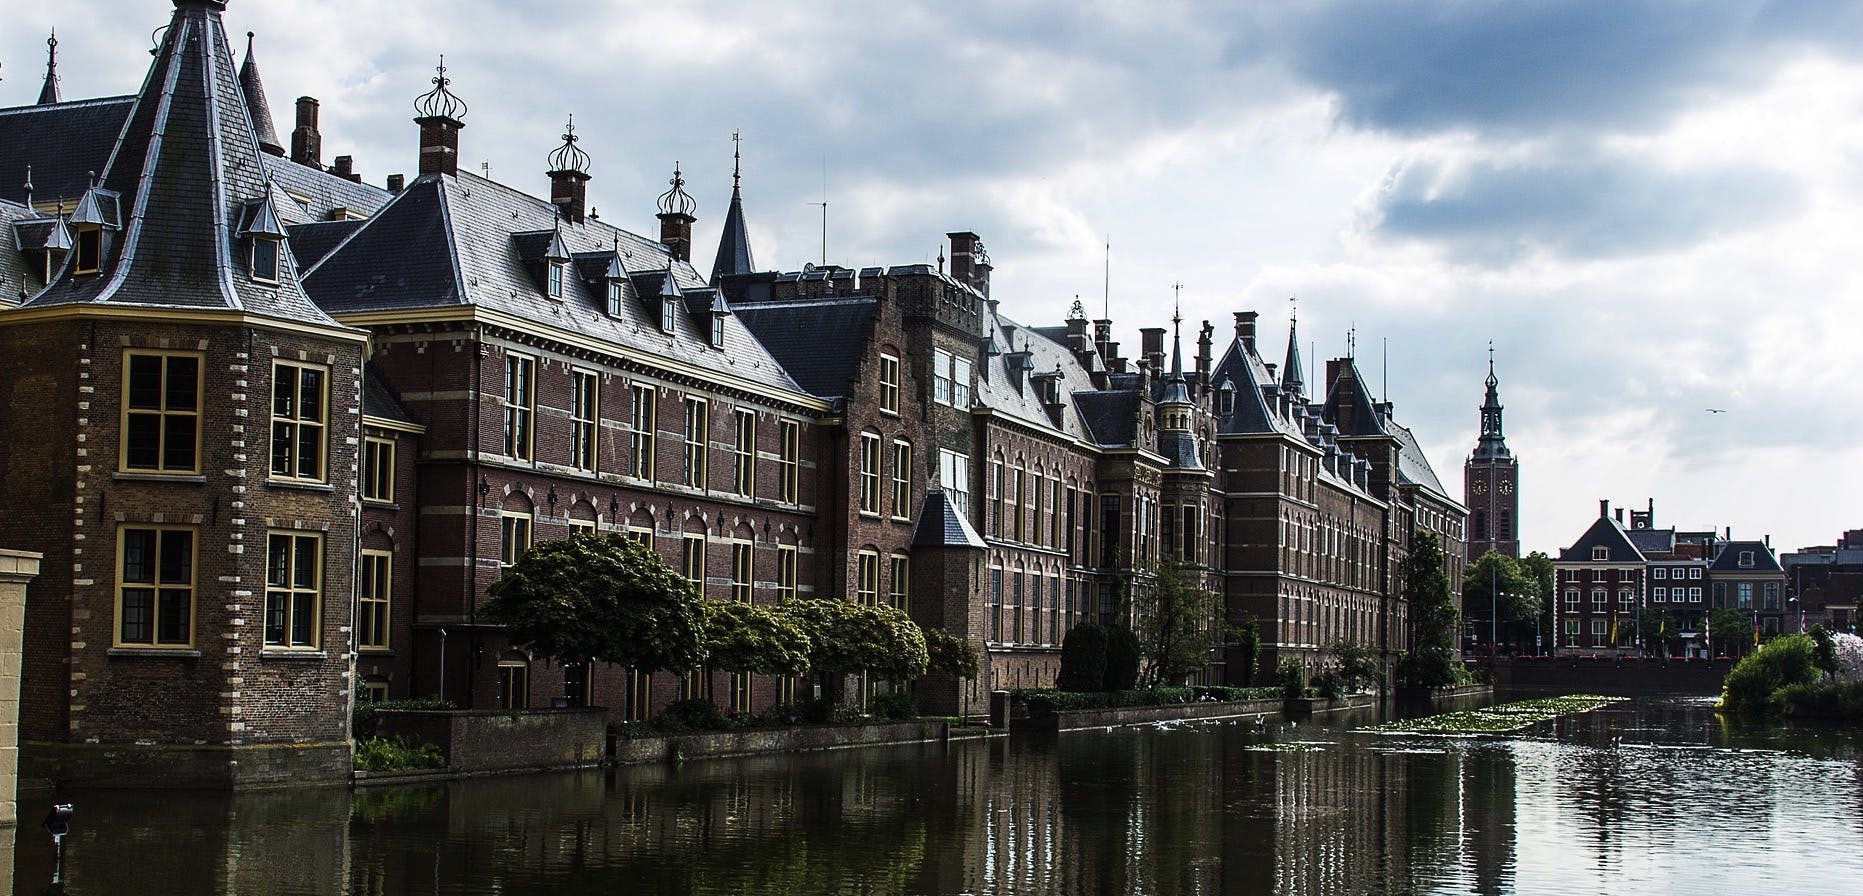 Sightseeing tour of The Hague and Delft with private transportation